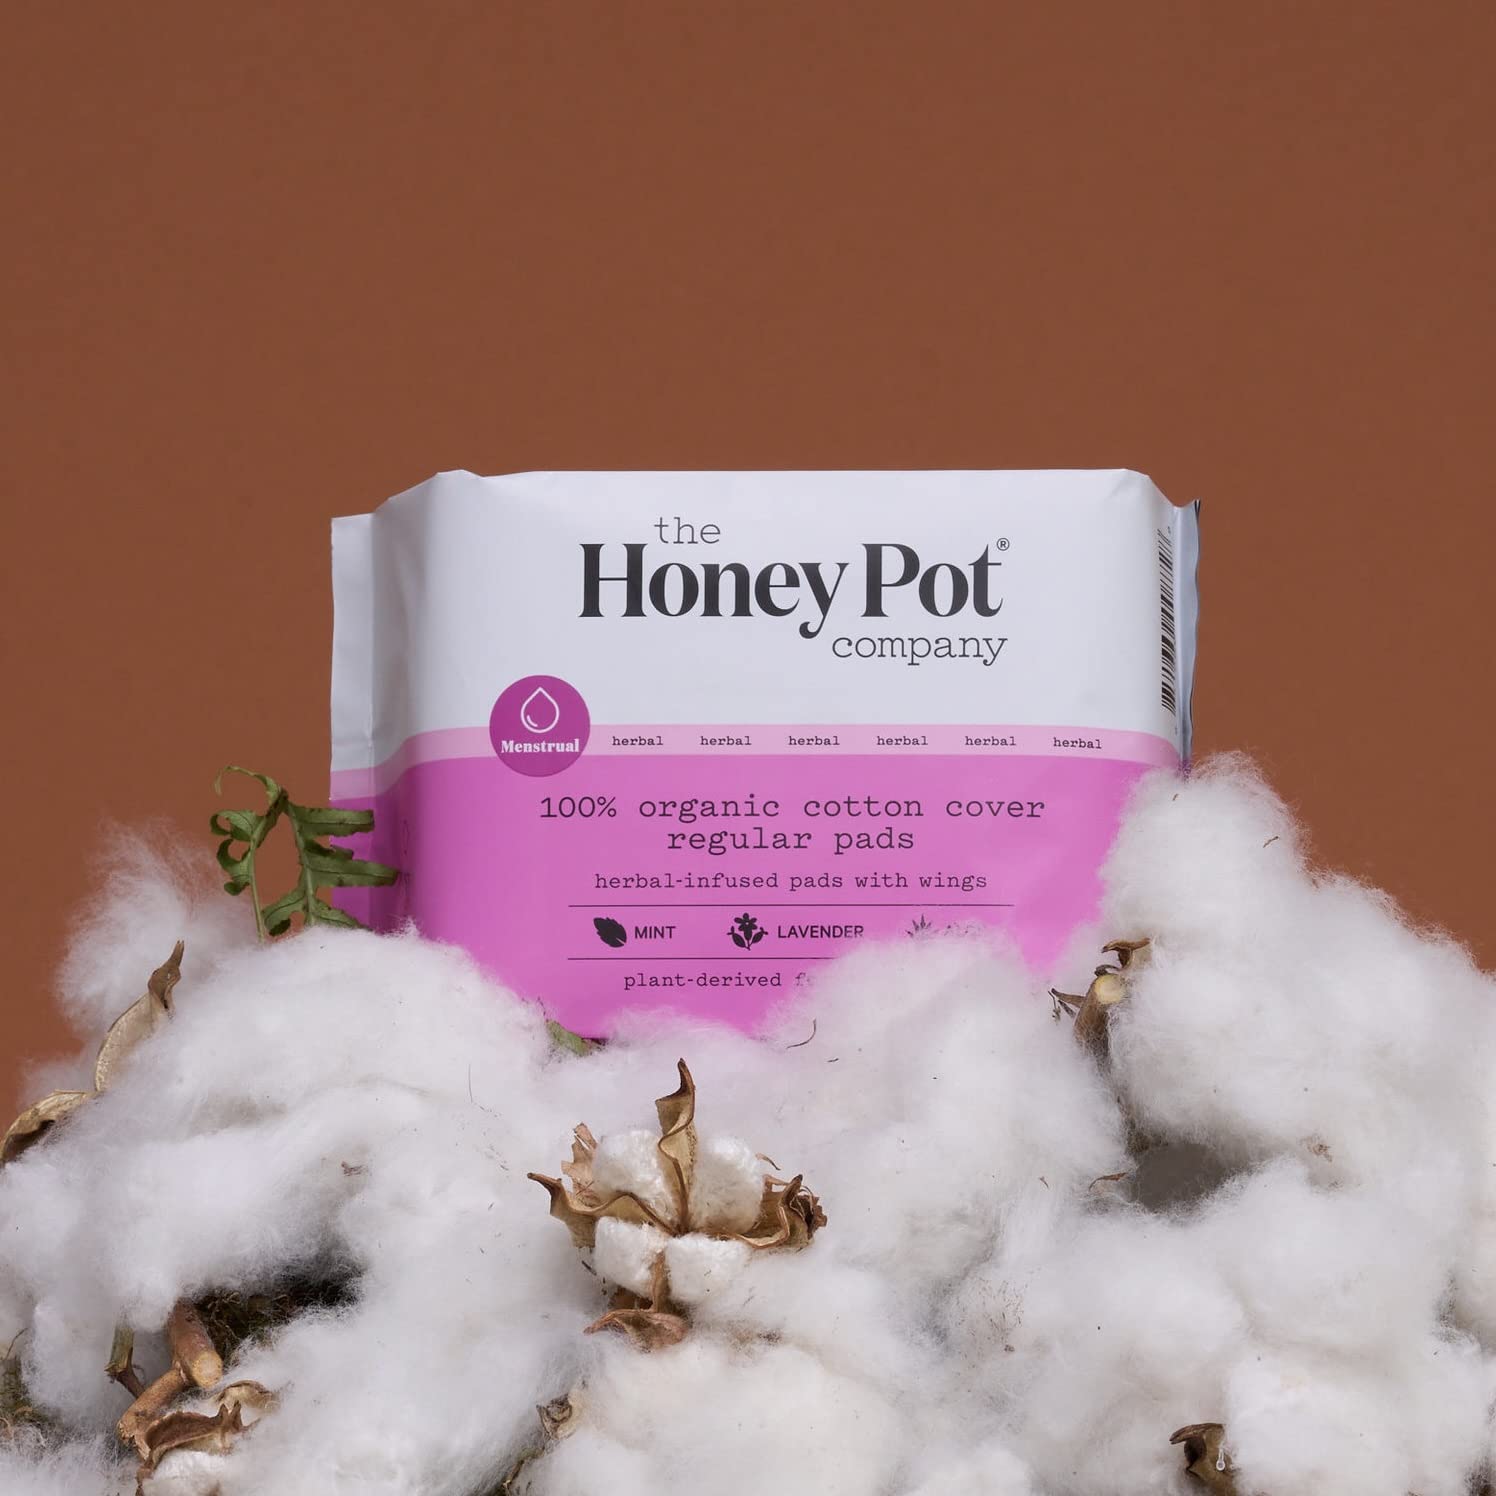 The Honey Pot Company - Regular Flow Pads with Wings - Organic Pads for Women - Herbal Infused w/Essential Oils for Cooling Effect, Cotton Cover, & Ultra-Absorbent Pulp Core - Feminine Care - 20 ct